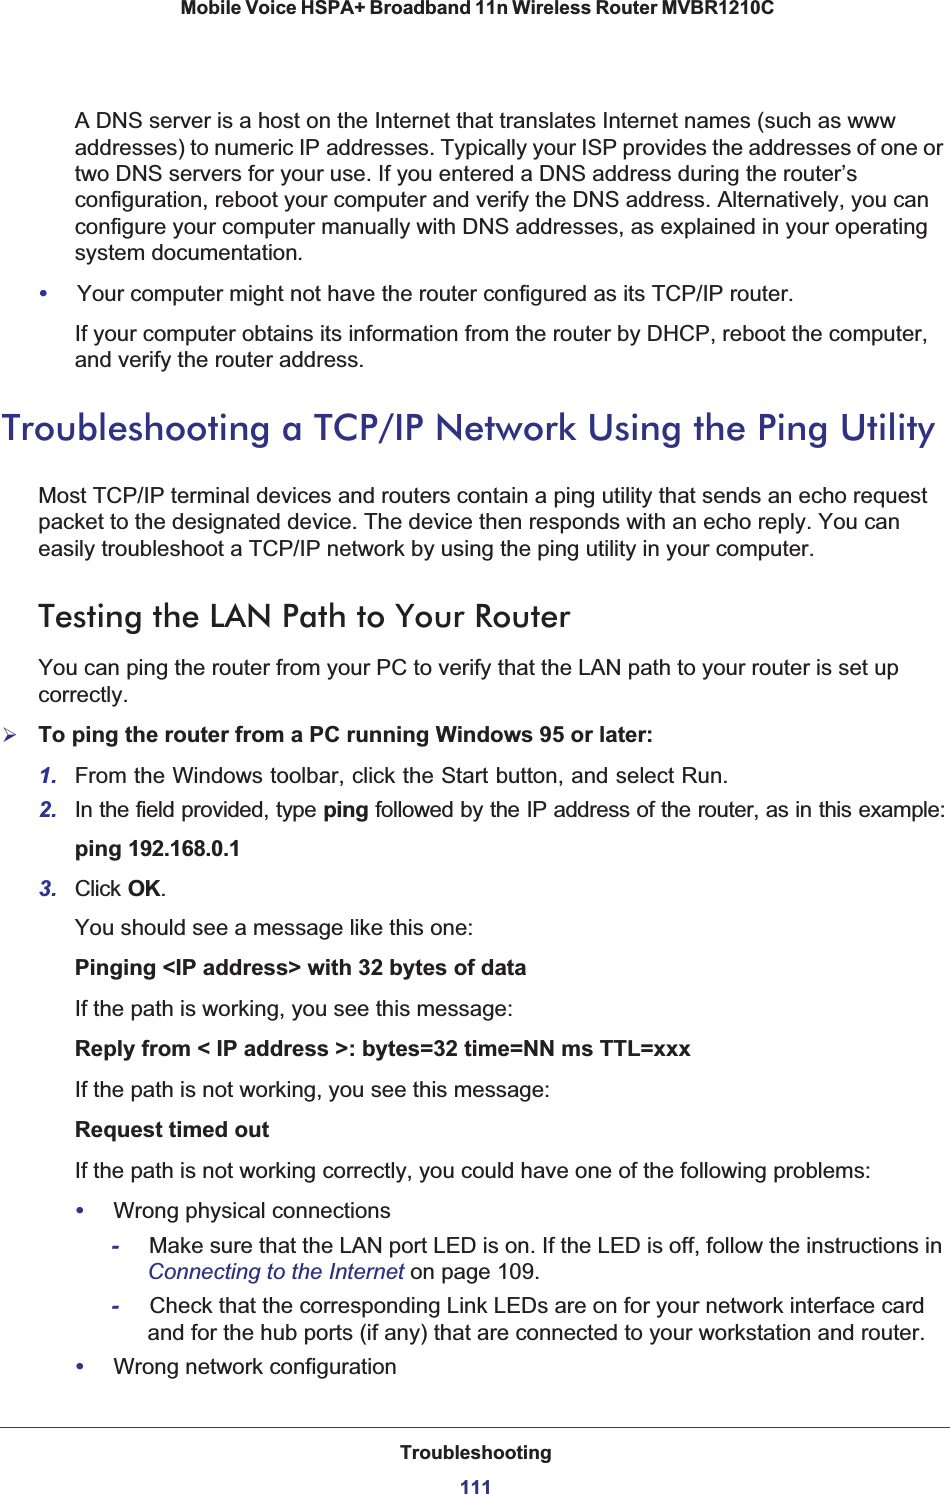 Troubleshooting111 Mobile Voice HSPA+ Broadband 11n Wireless Router MVBR1210CA DNS server is a host on the Internet that translates Internet names (such as www addresses) to numeric IP addresses. Typically your ISP provides the addresses of one or two DNS servers for your use. If you entered a DNS address during the router’s configuration, reboot your computer and verify the DNS address. Alternatively, you can configure your computer manually with DNS addresses, as explained in your operating system documentation.•Your computer might not have the router configured as its TCP/IP router.If your computer obtains its information from the router by DHCP, reboot the computer, and verify the router address.Troubleshooting a TCP/IP Network Using the Ping UtilityMost TCP/IP terminal devices and routers contain a ping utility that sends an echo request packet to the designated device. The device then responds with an echo reply. You can easily troubleshoot a TCP/IP network by using the ping utility in your computer.Testing the LAN Path to Your RouterYou can ping the router from your PC to verify that the LAN path to your router is set up correctly.¾To ping the router from a PC running Windows 95 or later:1. From the Windows toolbar, click the Start button, and select Run.2. In the field provided, type ping followed by the IP address of the router, as in this example:ping 192.168.0.13. Click OK.You should see a message like this one:Pinging &lt;IP address&gt; with 32 bytes of dataIf the path is working, you see this message:Reply from &lt; IP address &gt;: bytes=32 time=NN ms TTL=xxxIf the path is not working, you see this message:Request timed outIf the path is not working correctly, you could have one of the following problems:•Wrong physical connections-Make sure that the LAN port LED is on. If the LED is off, follow the instructions in Connecting to the Internet on page 109.-Check that the corresponding Link LEDs are on for your network interface card and for the hub ports (if any) that are connected to your workstation and router.•Wrong network configuration